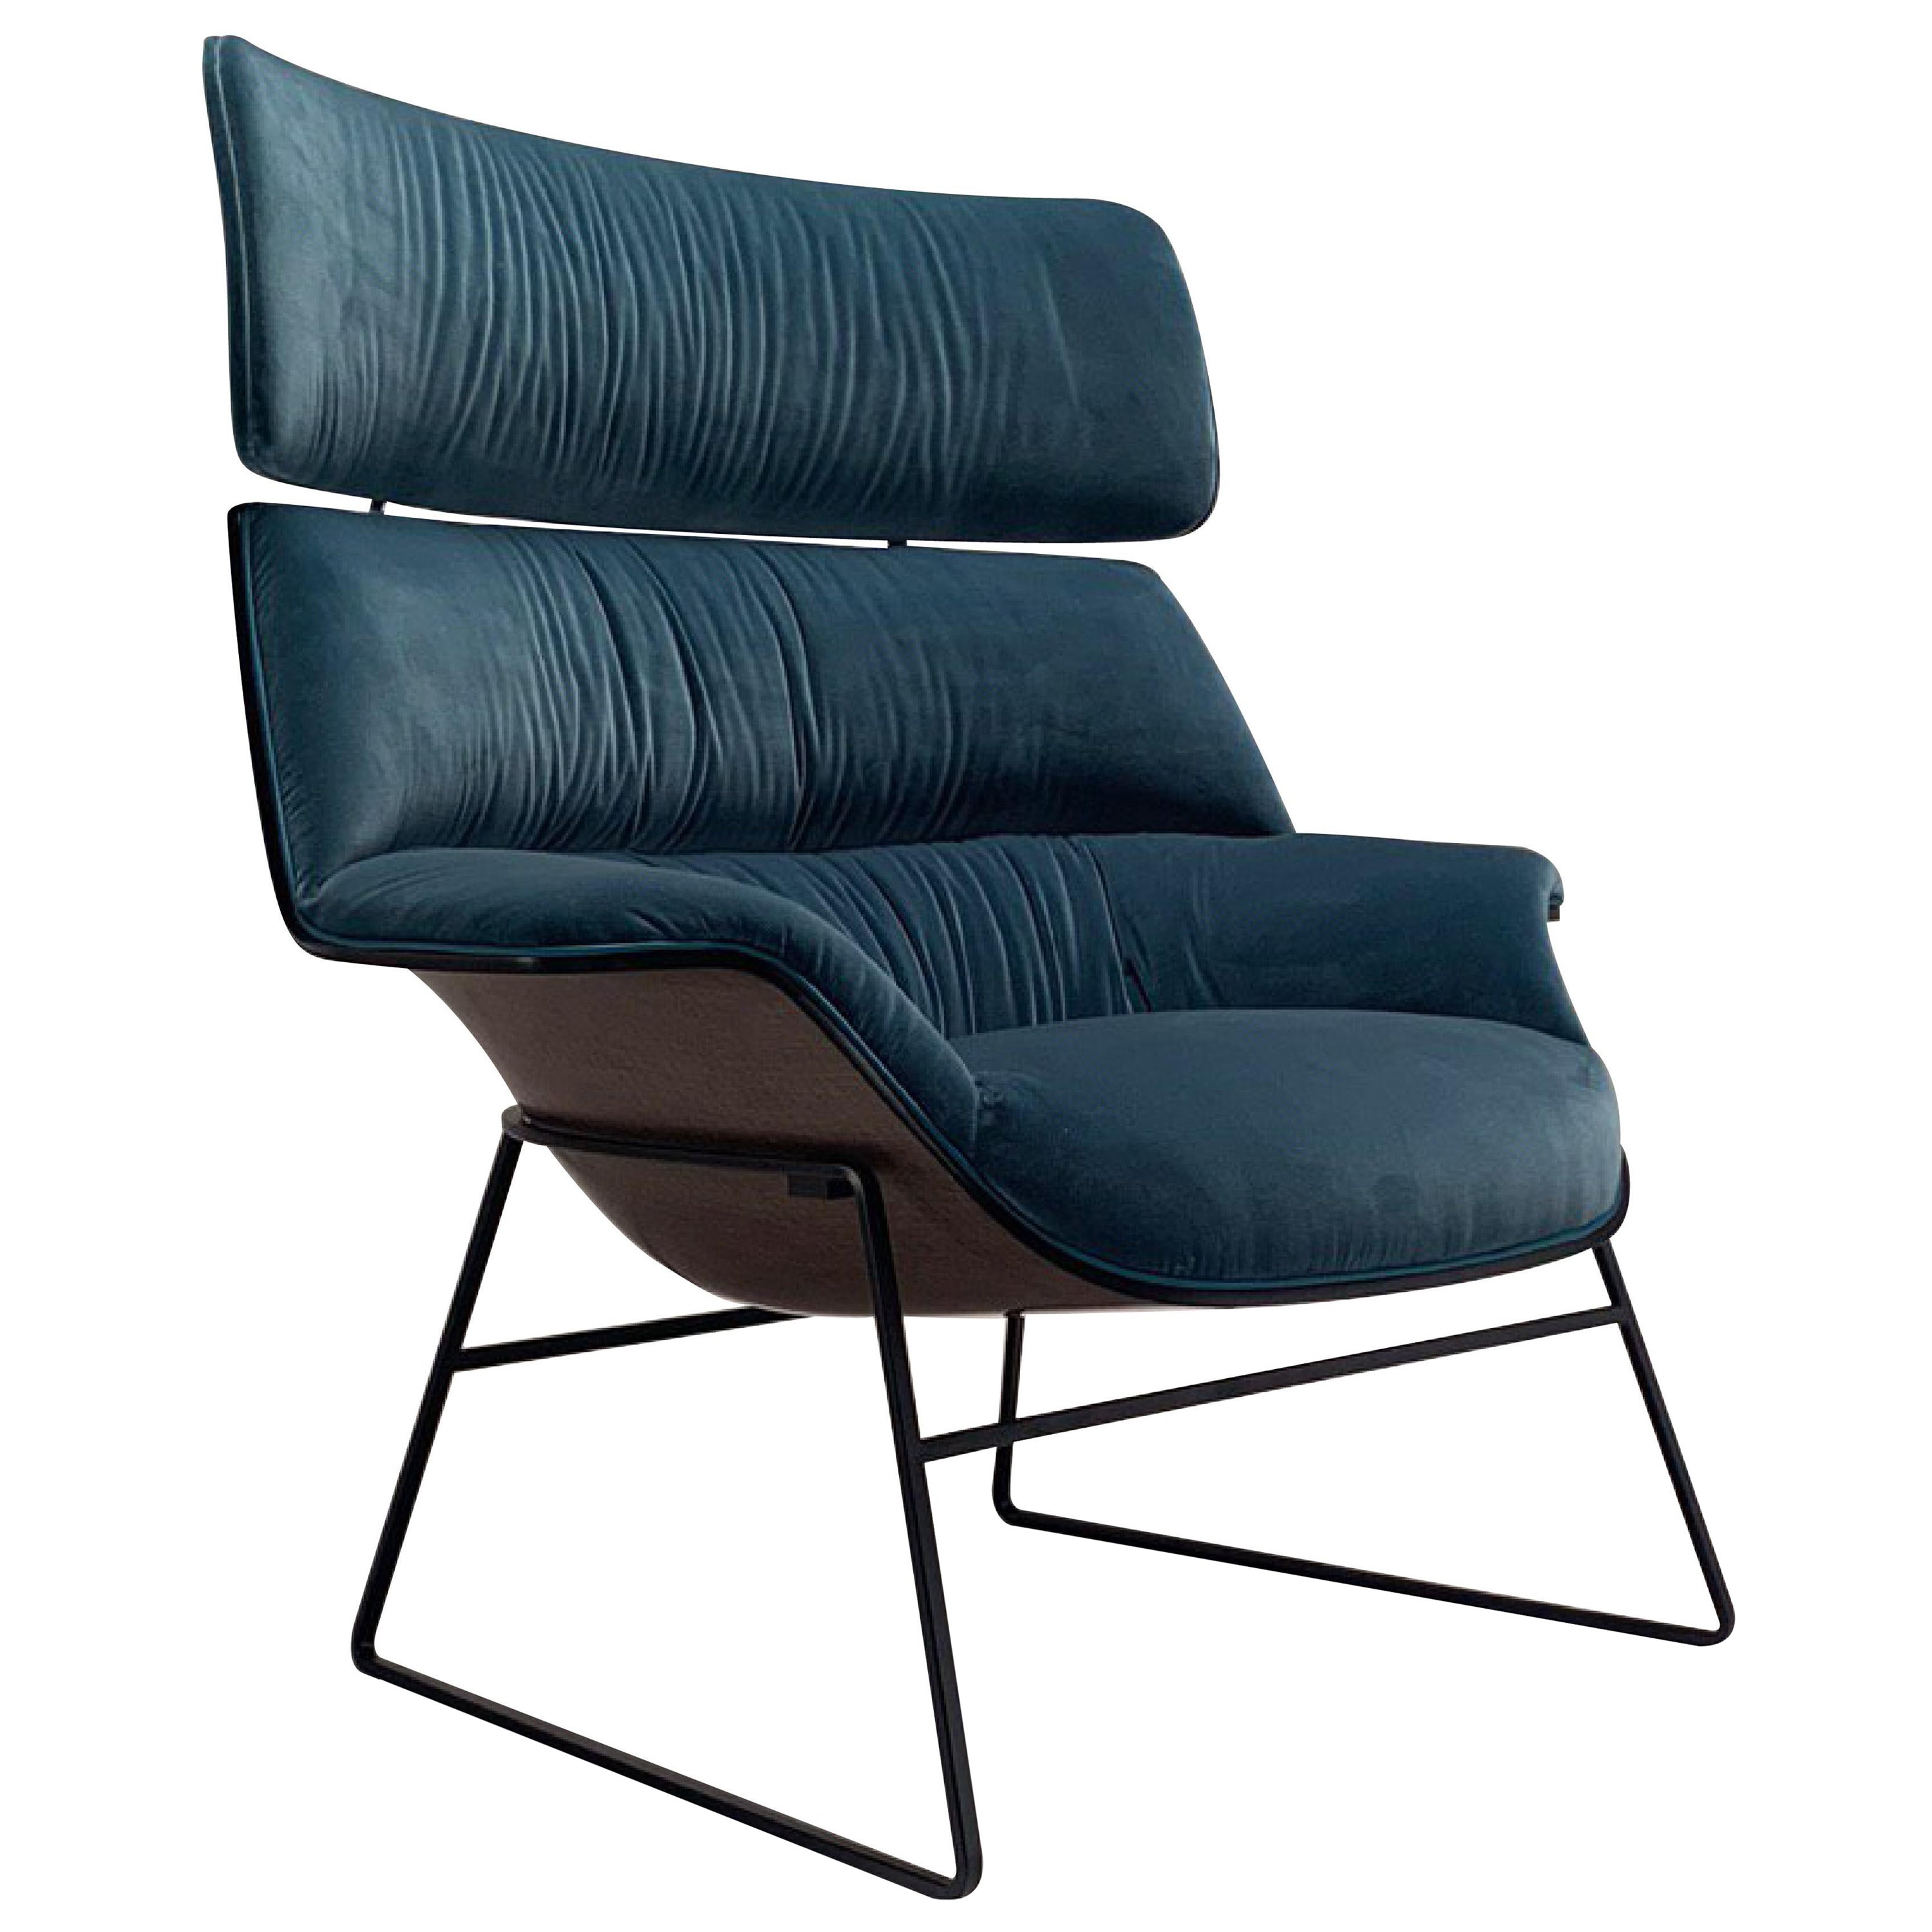 Saint Luc 'Coach 5' Lounge Chair in Blue Velvet with Headrest by J.M. Massaud For Sale